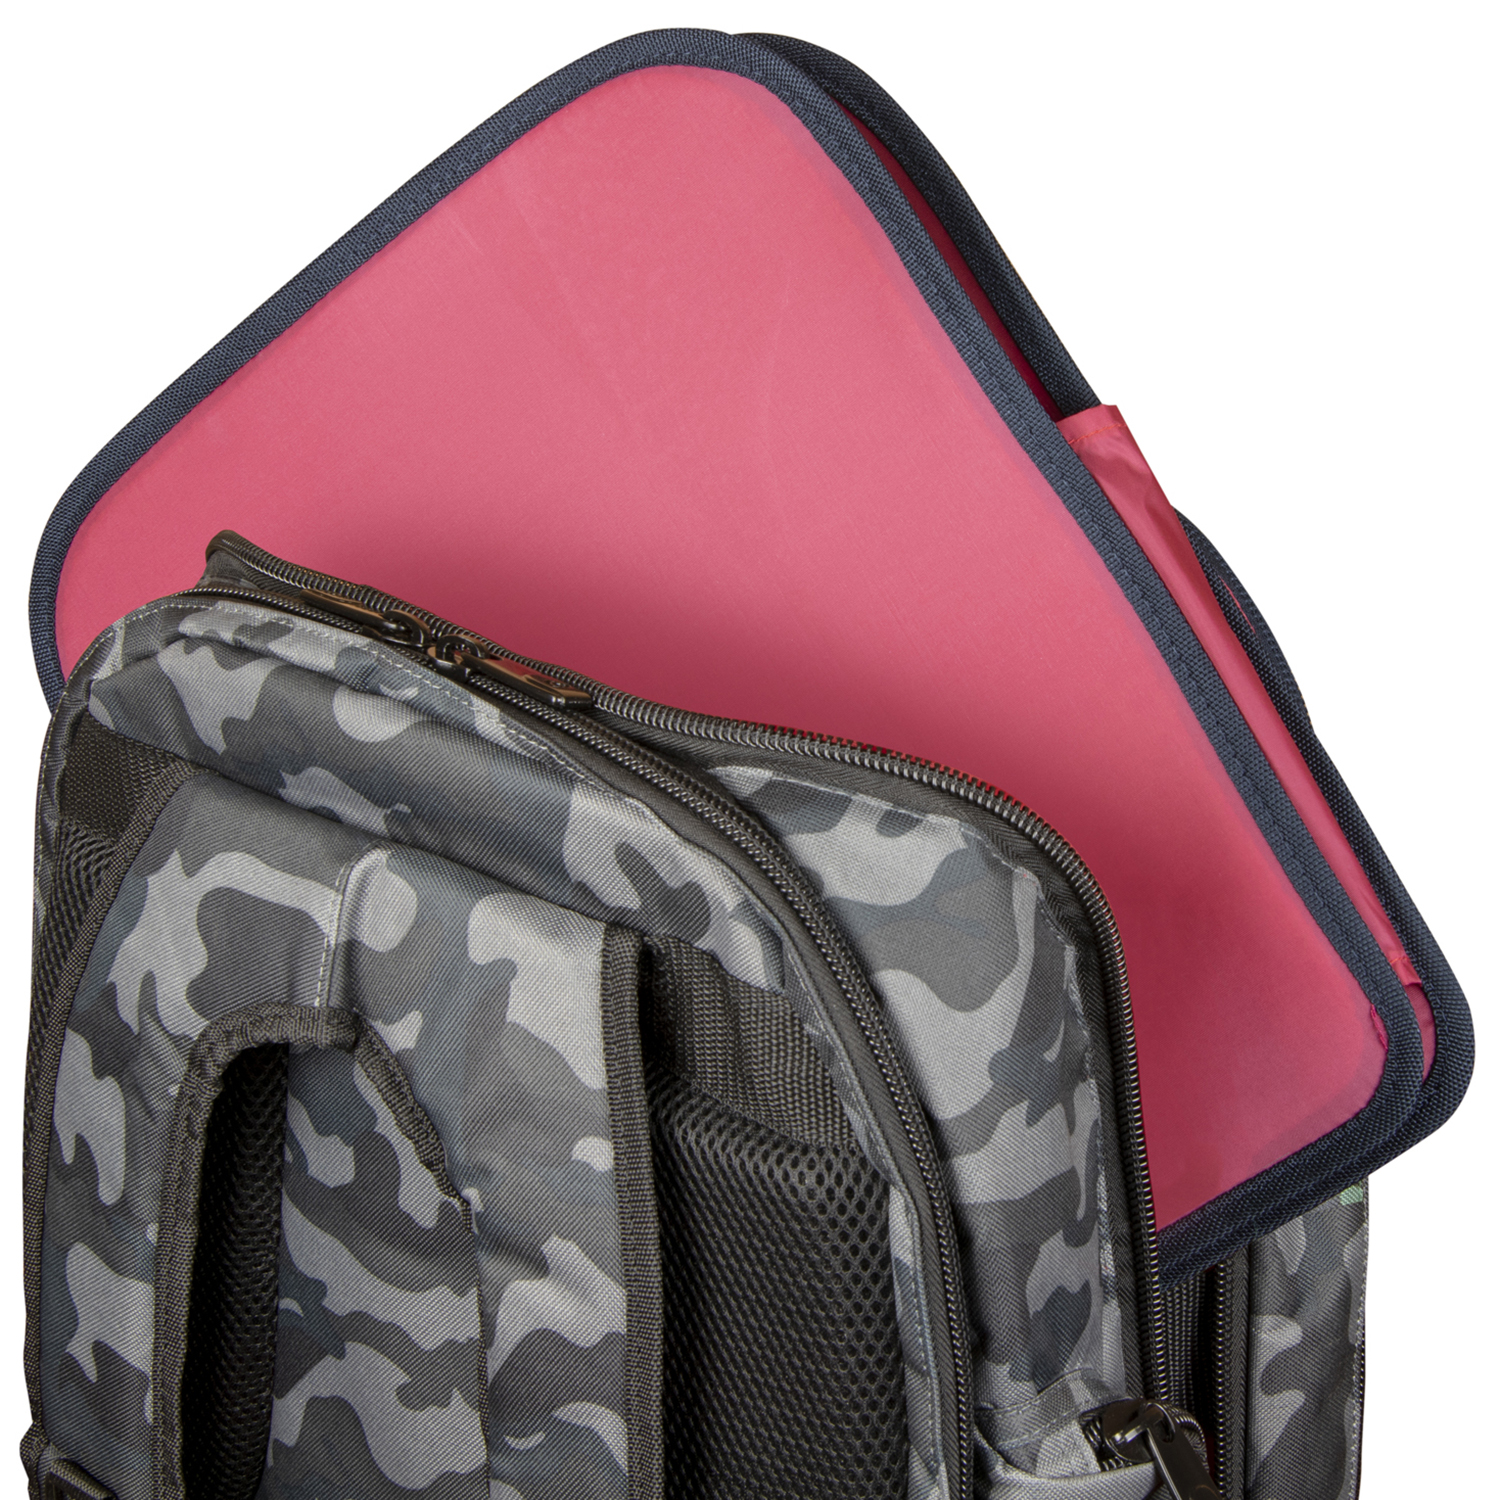 Gray Camouflage Digital Gear Backpack - Odyssey Cases